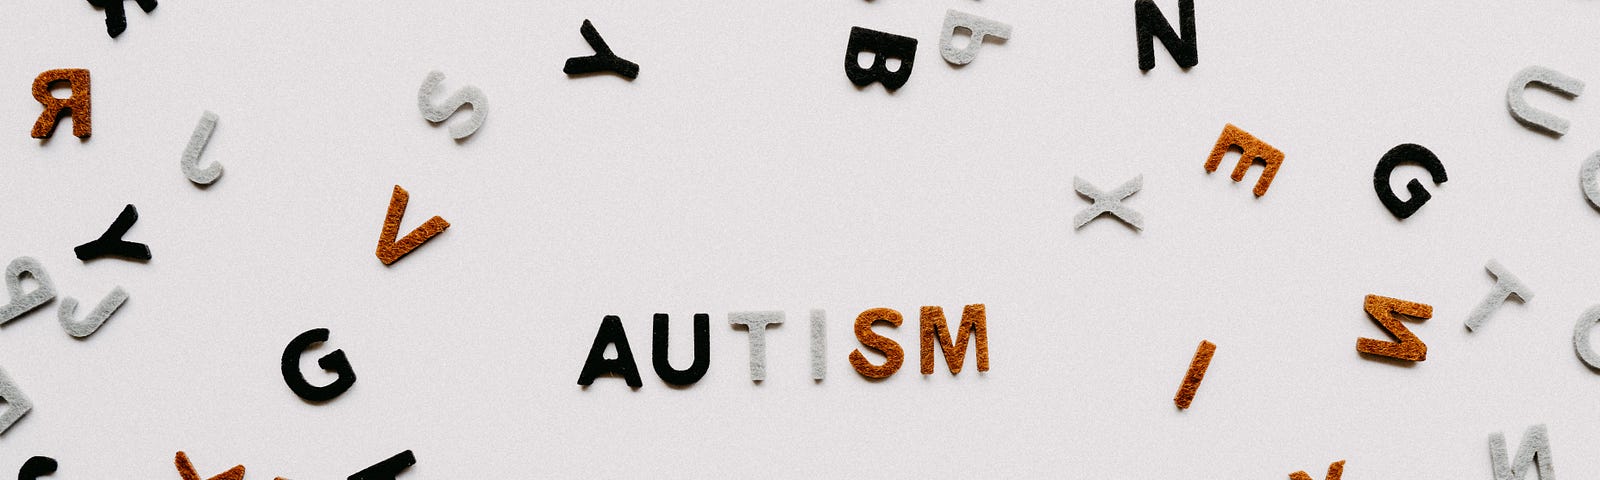 A collection of scrambled letters is laid out across the table. A small group of them in the center are lined up, spelling the word ‘autism’ in blue, white and orange.